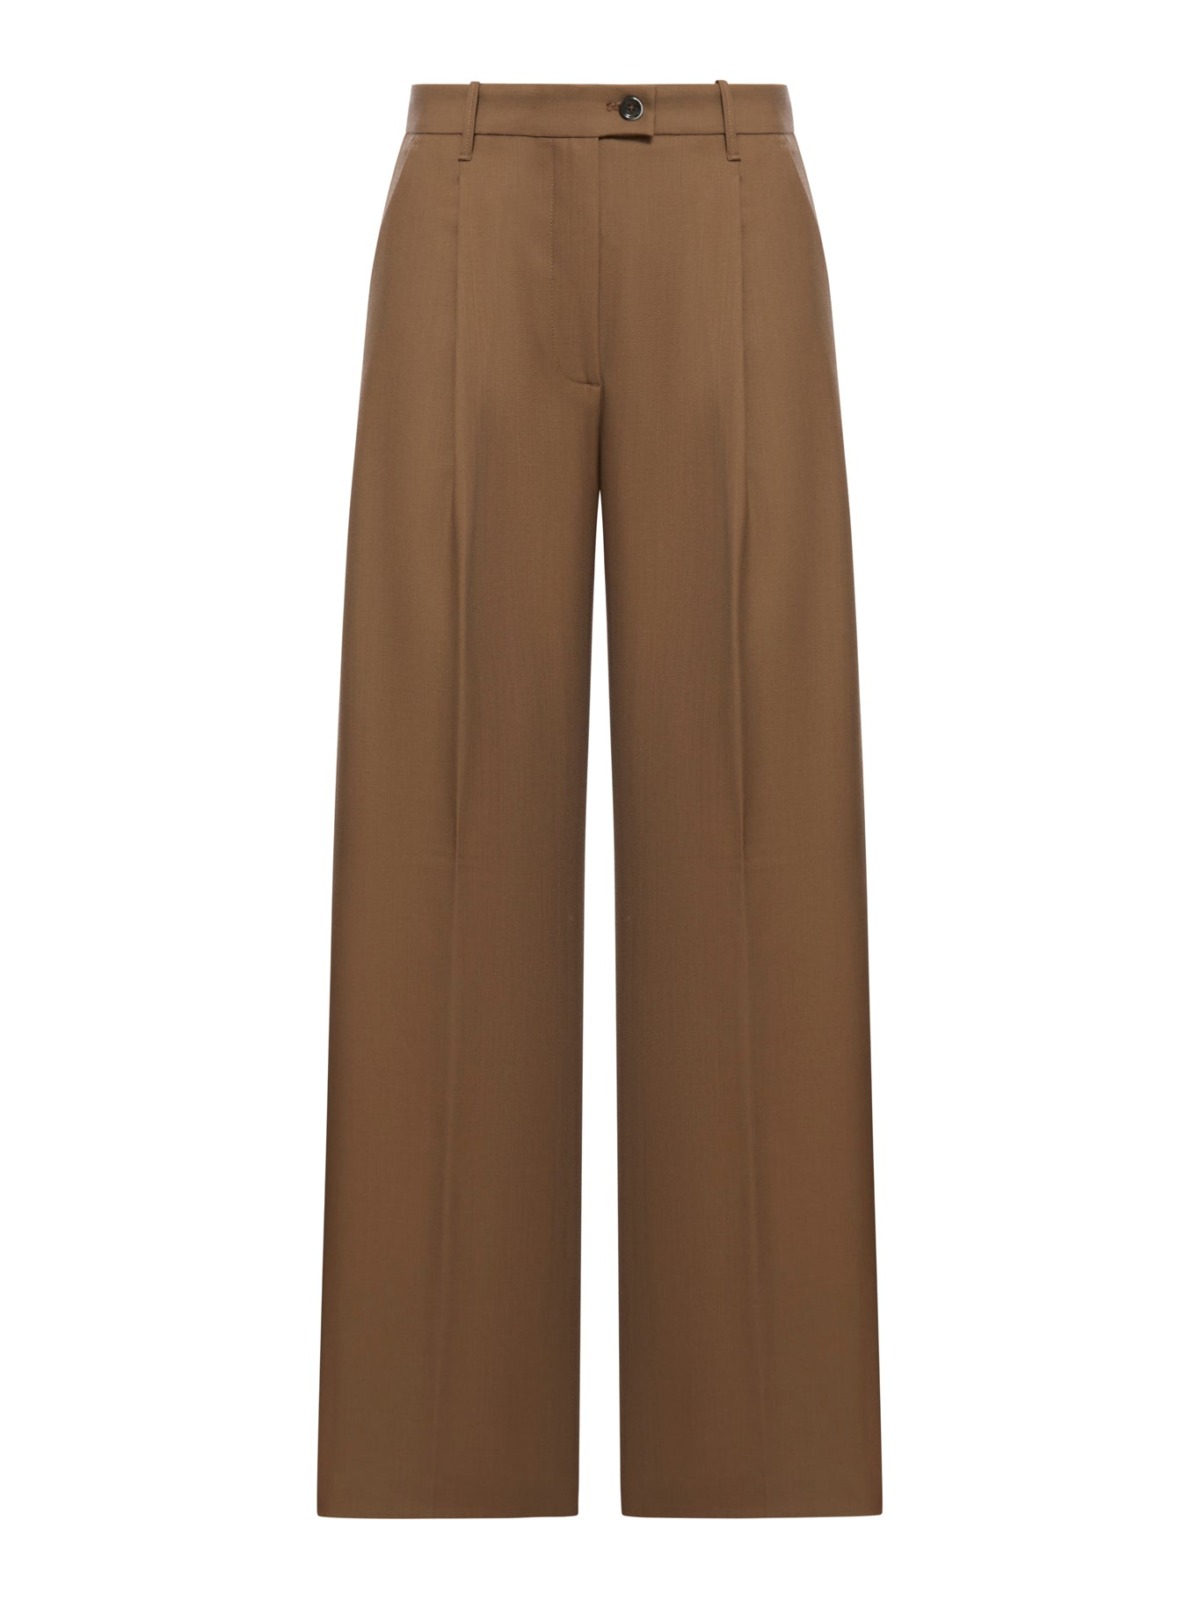 Suitnegozi Woman Pants Brown Nine In The Morning GOOFASH